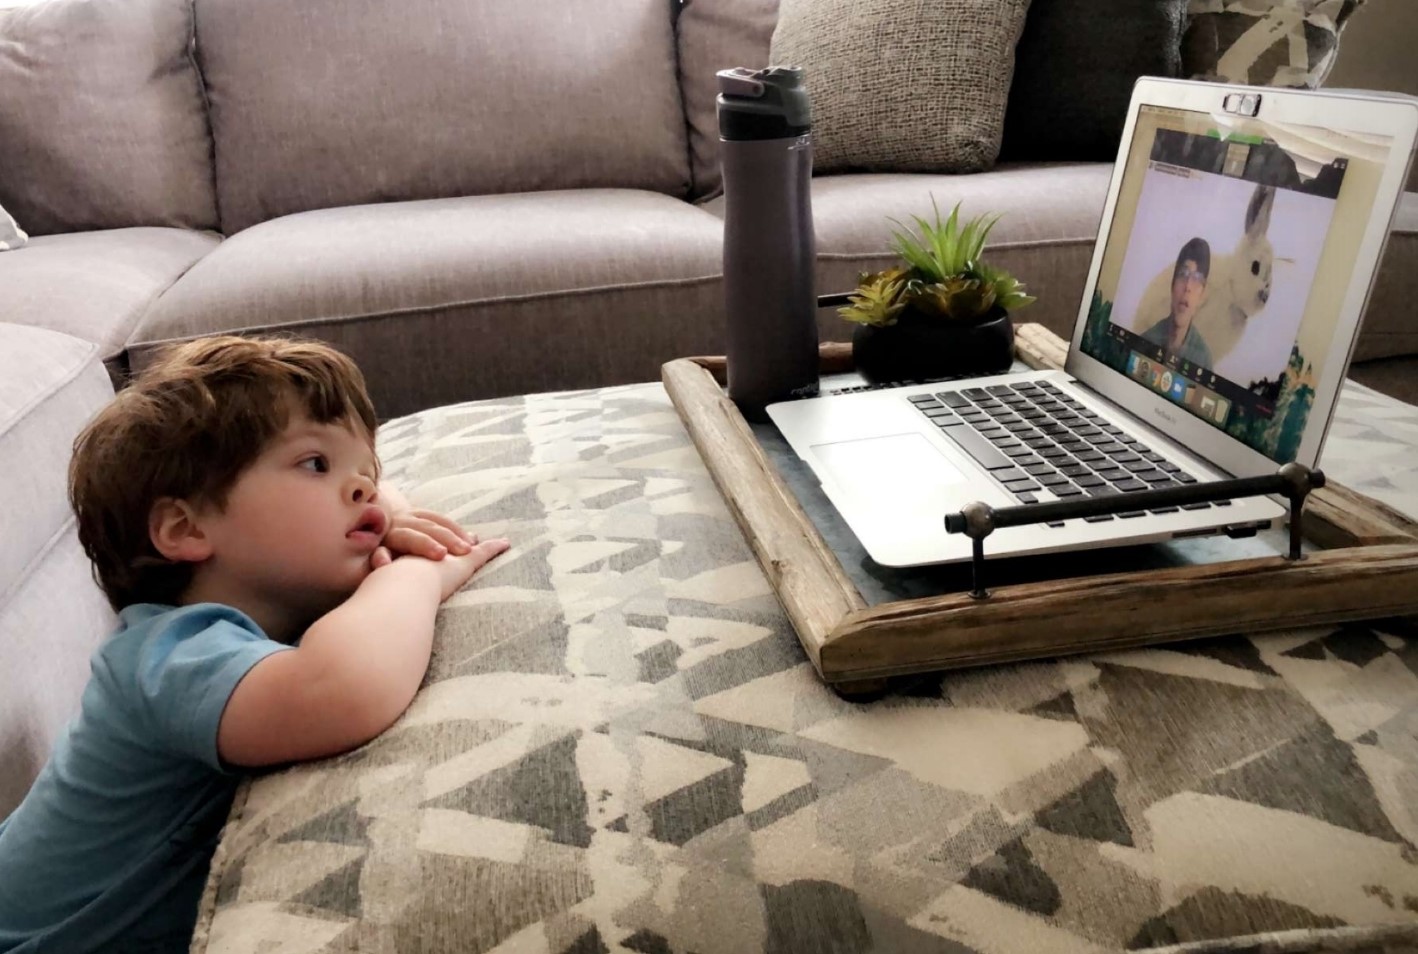 A toddler watching the presentation via laptop